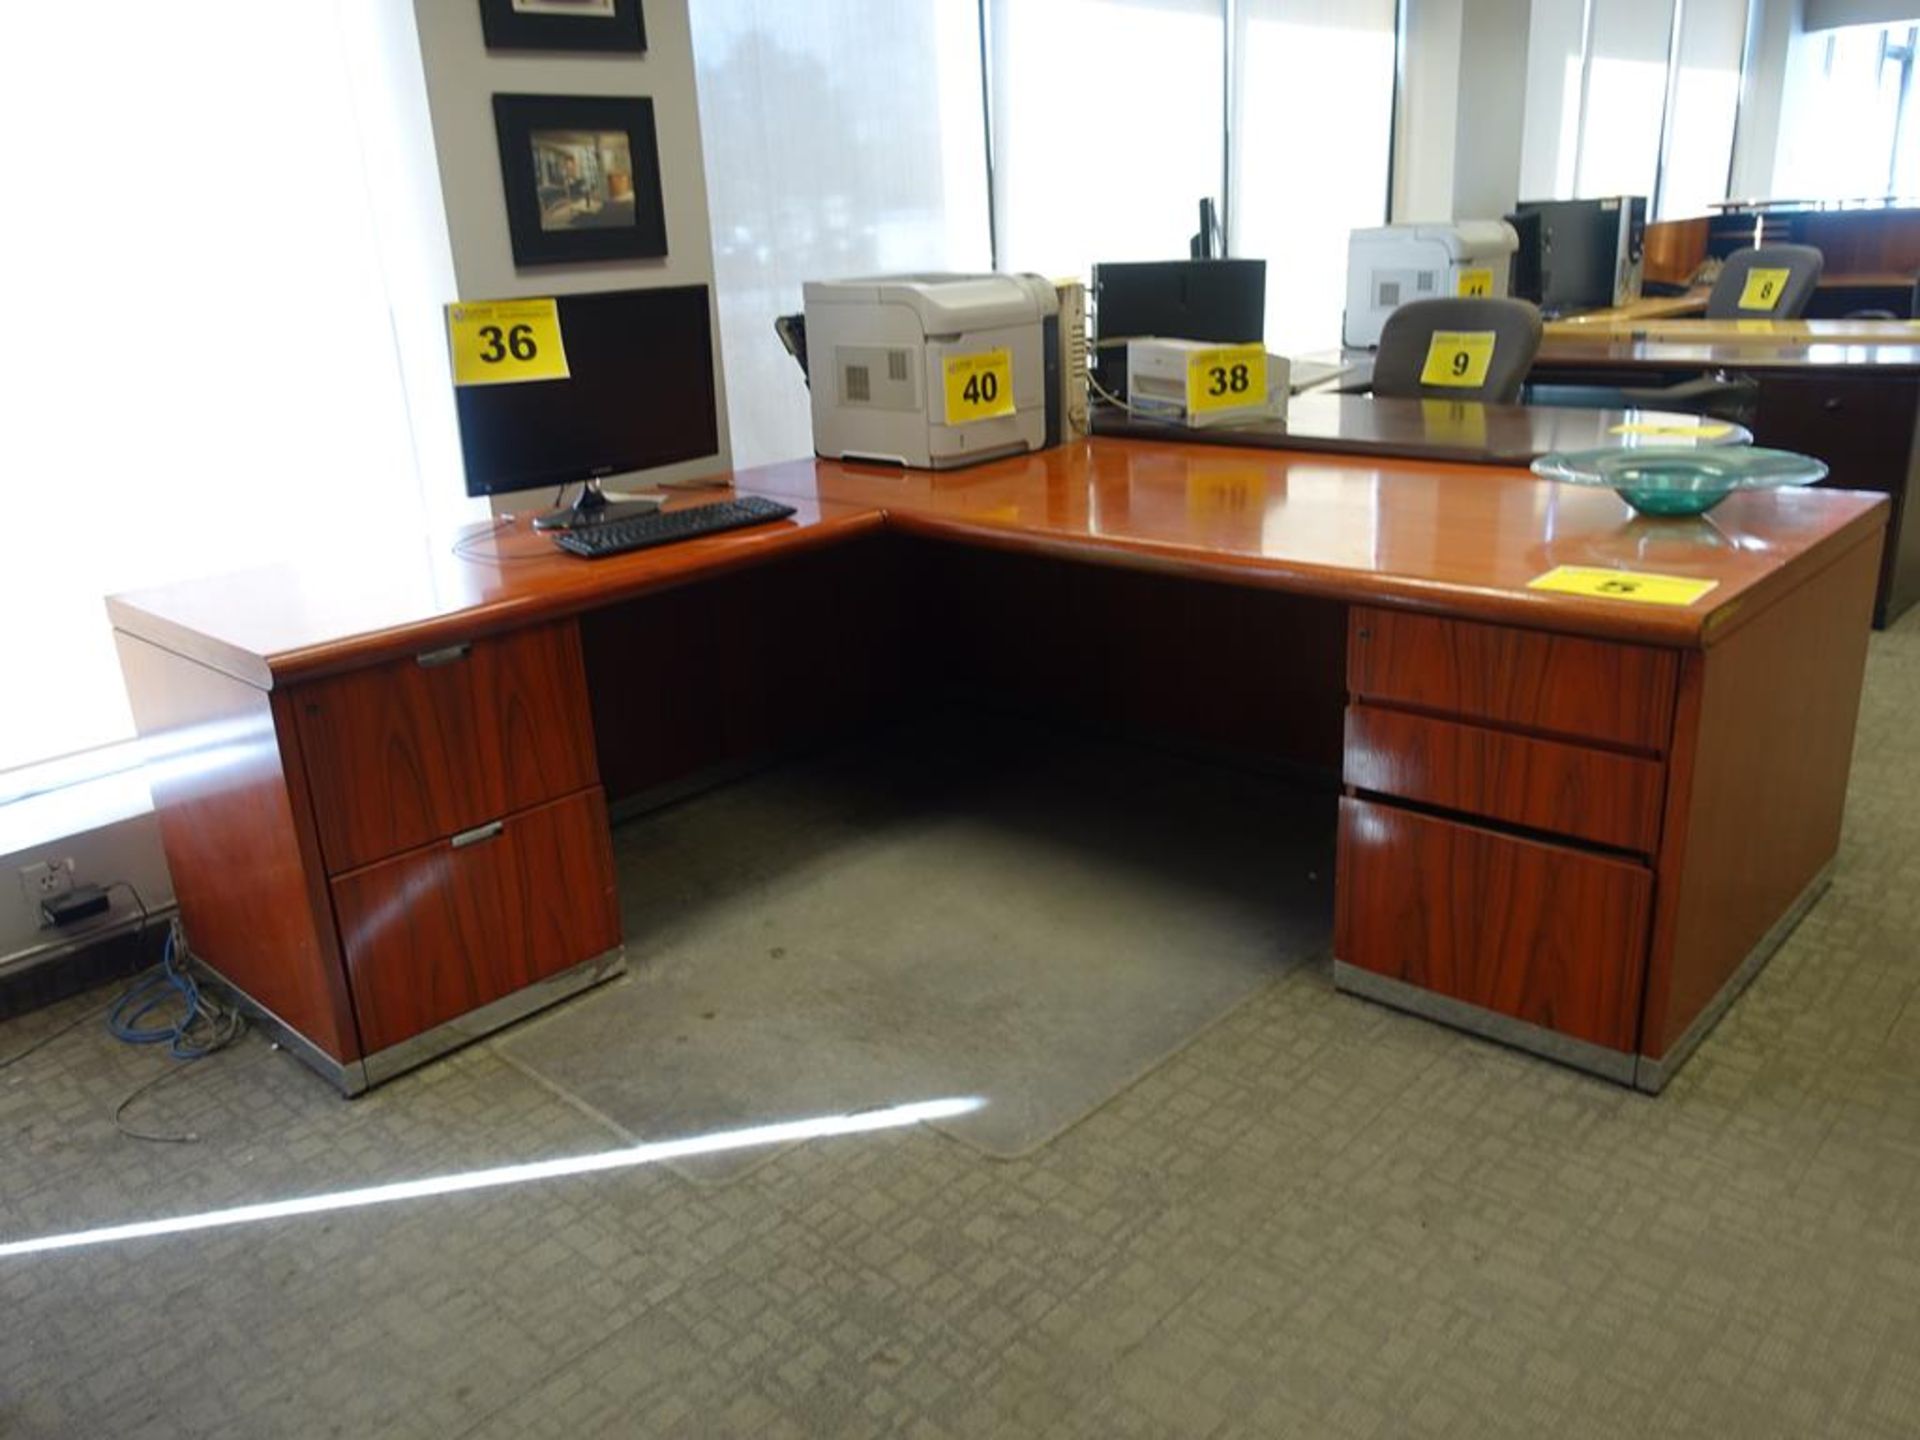 L-SHAPED, WOOD DESK WITH GLASS BOWL